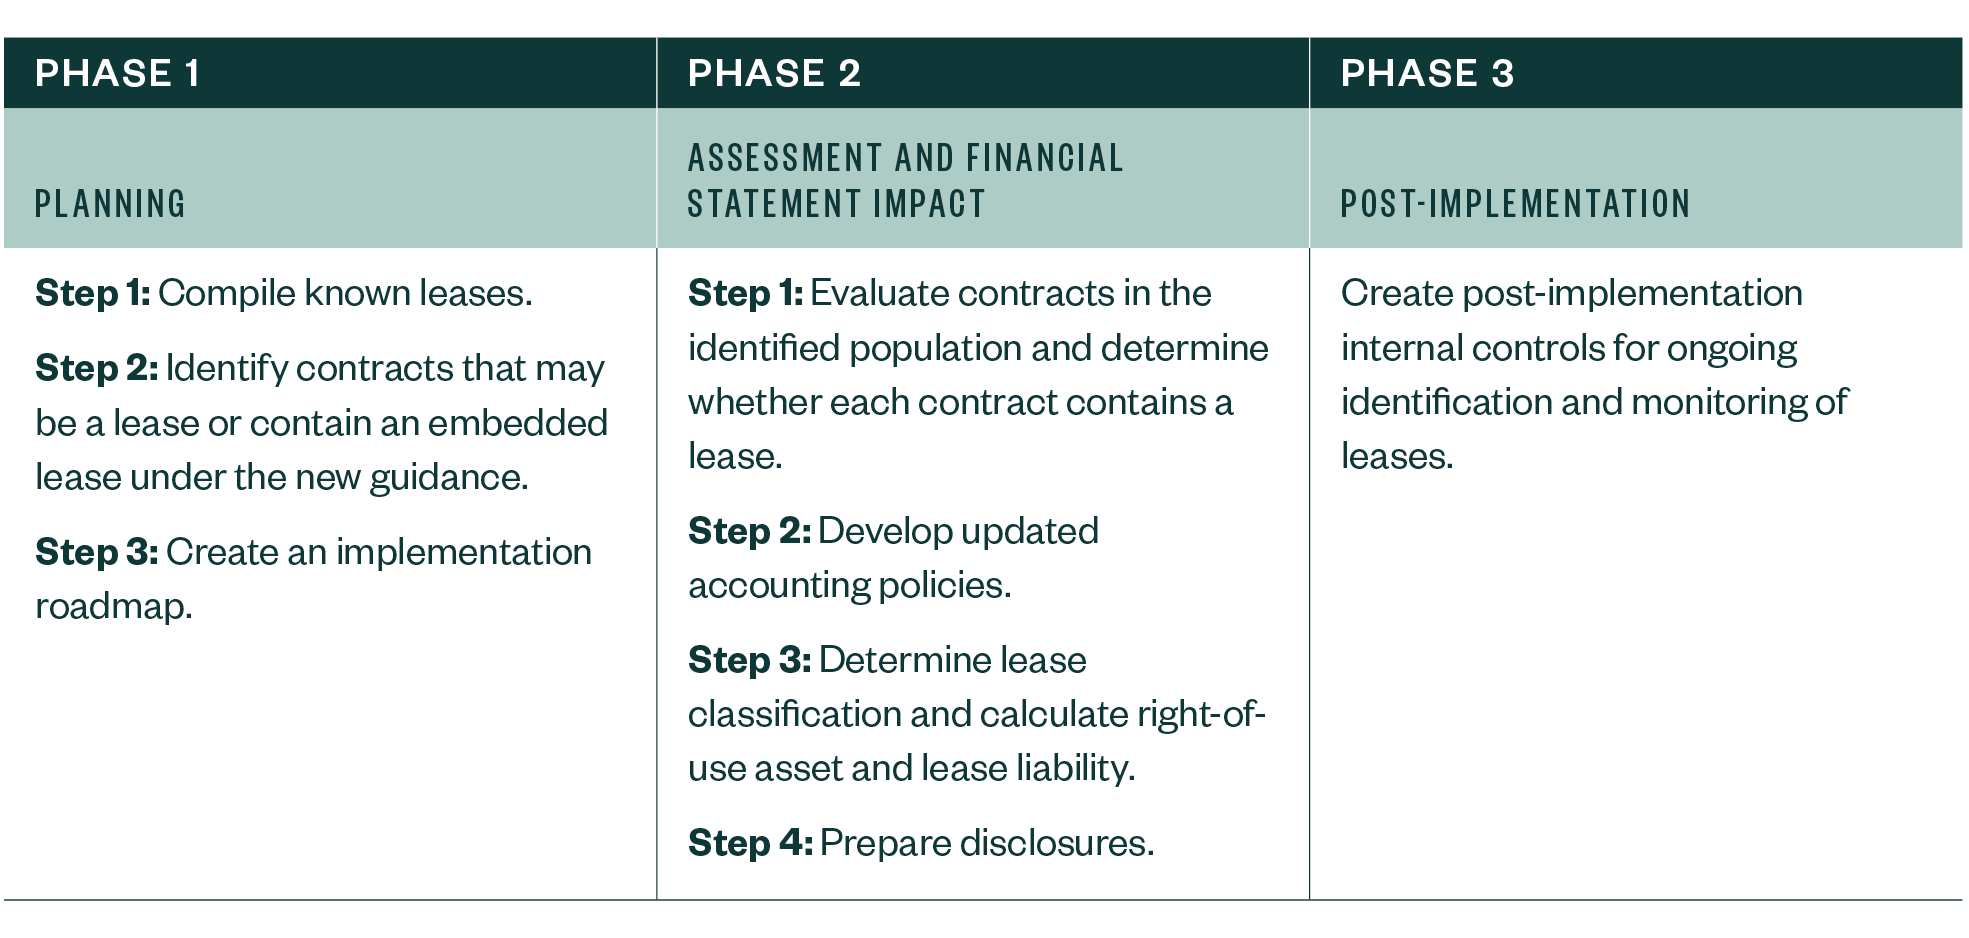 Explanation of the three phased approach to implementation with a description of each phase